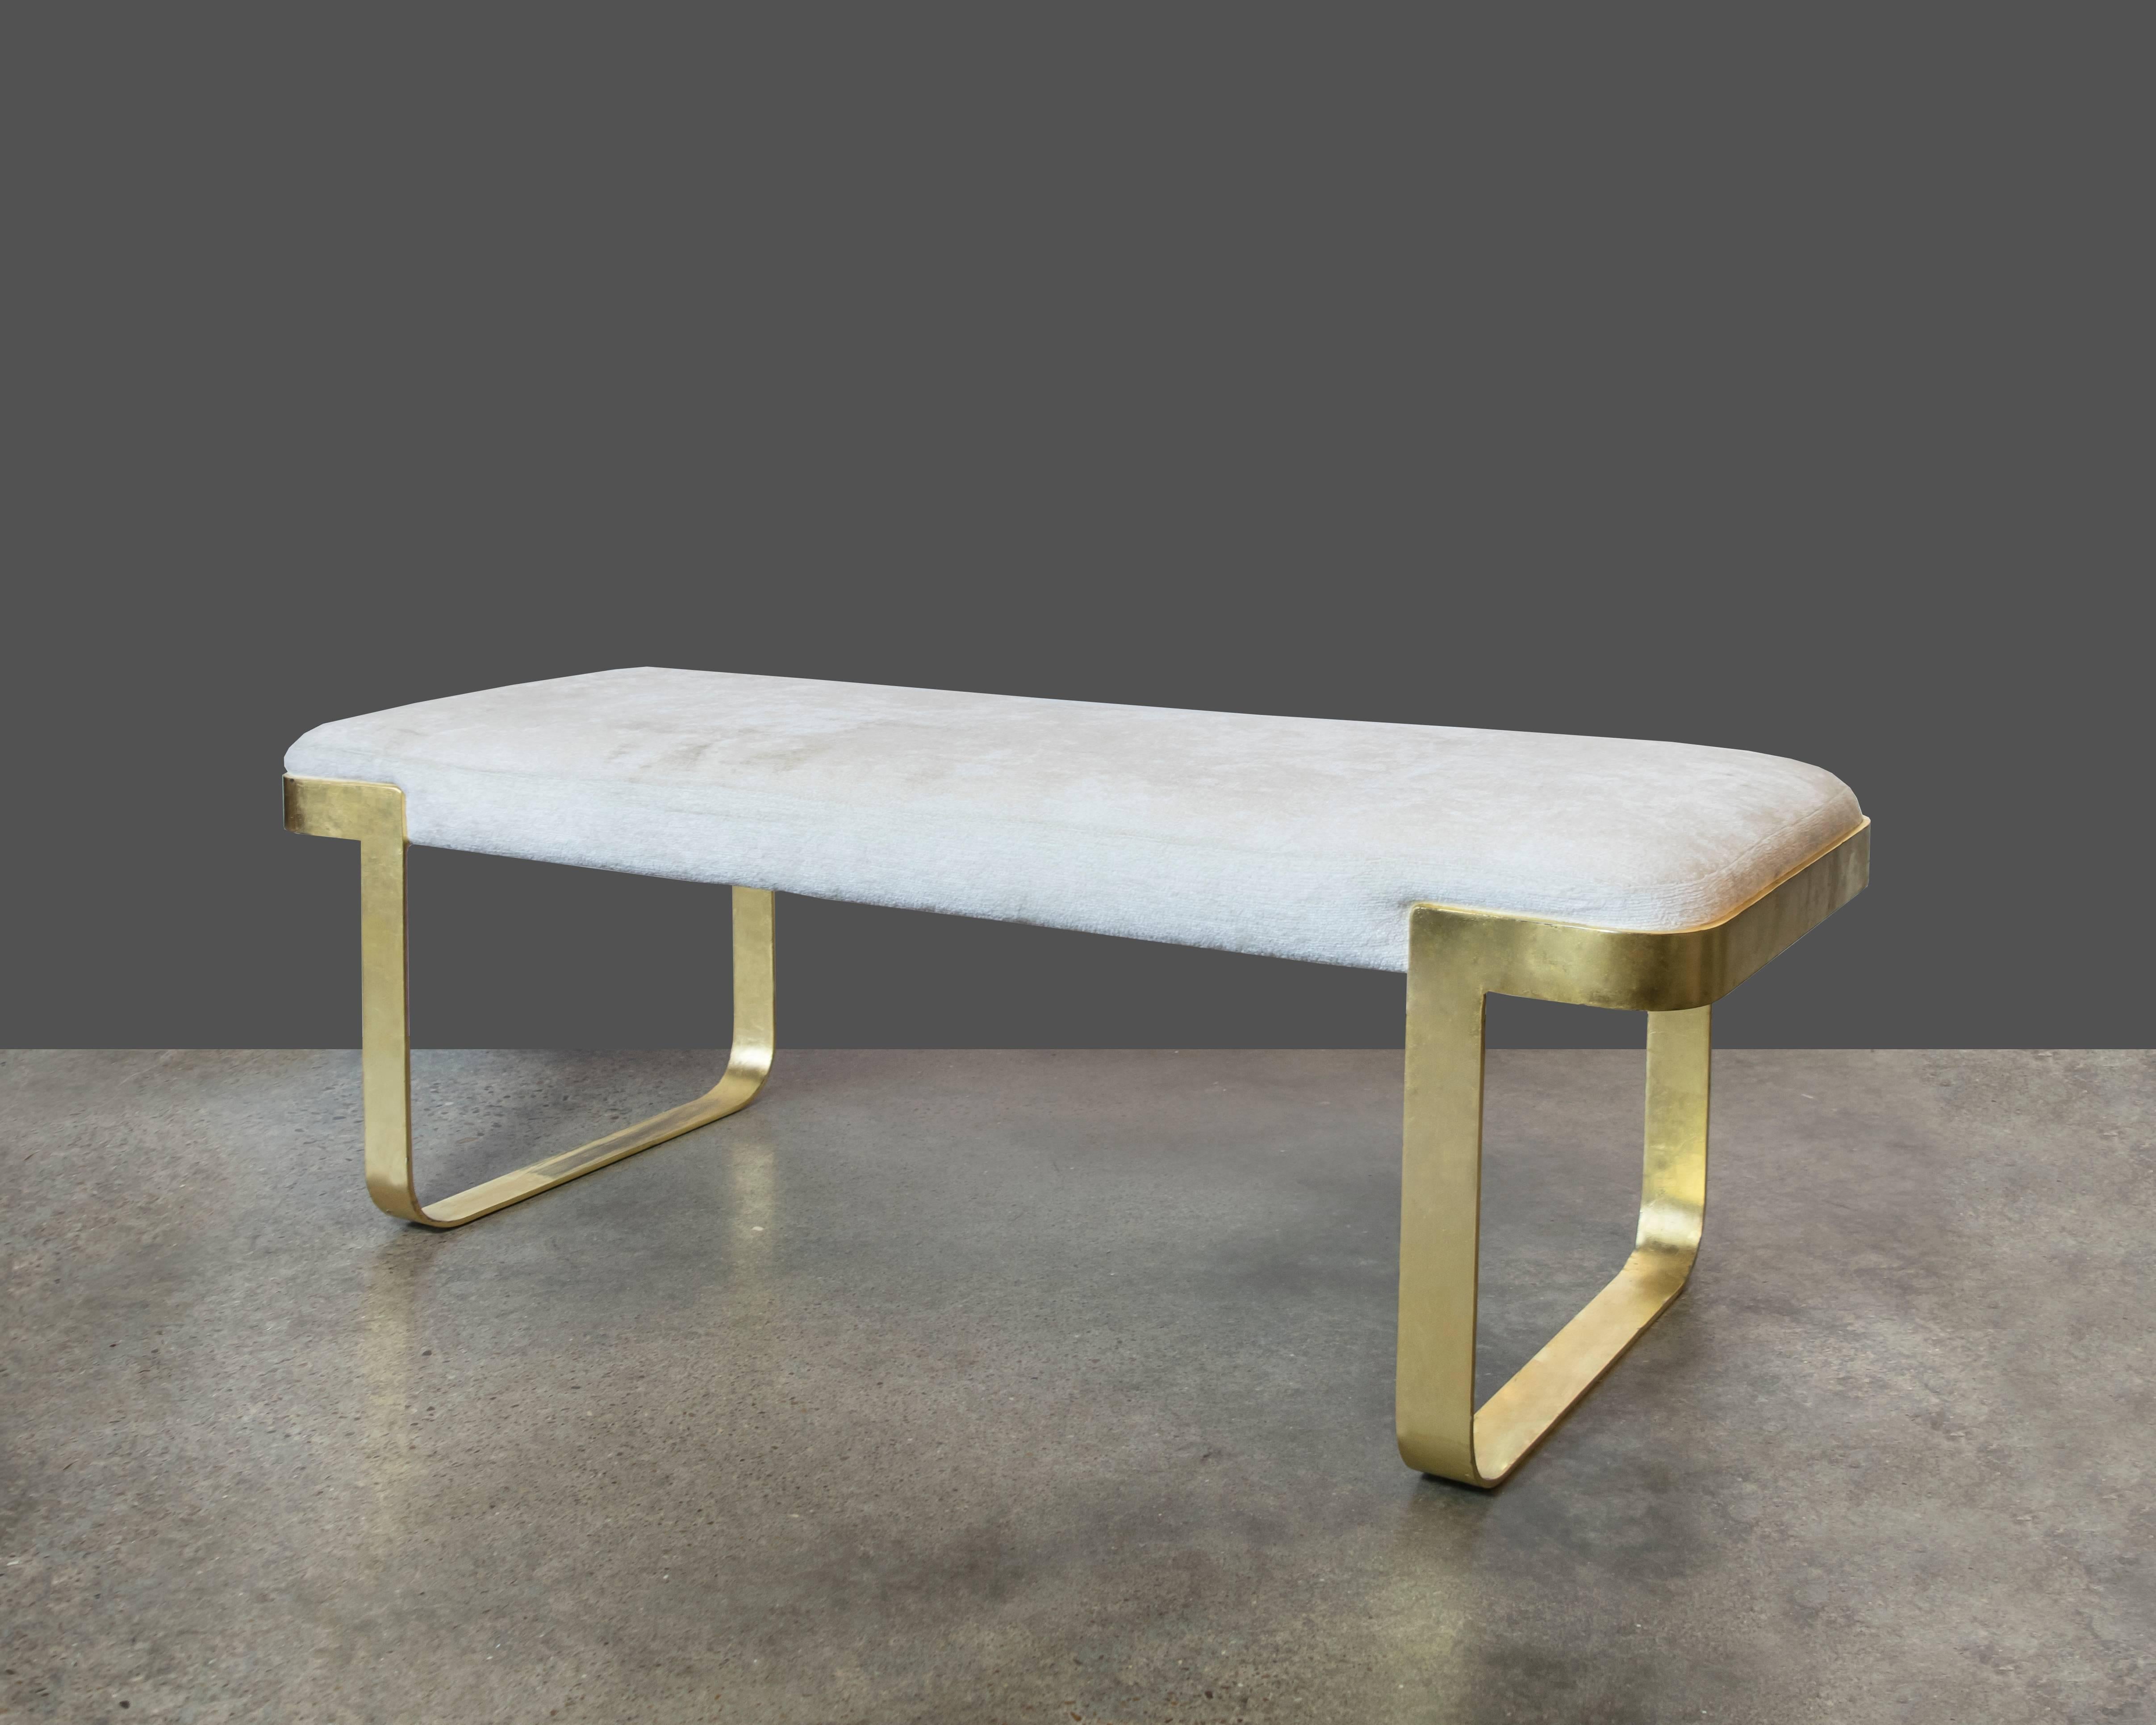 Perfect size entryway or end of bed bench in gold-plated metal and off-white chenille upholstery. A few scratches here and there but otherwise in really good vintage condition.